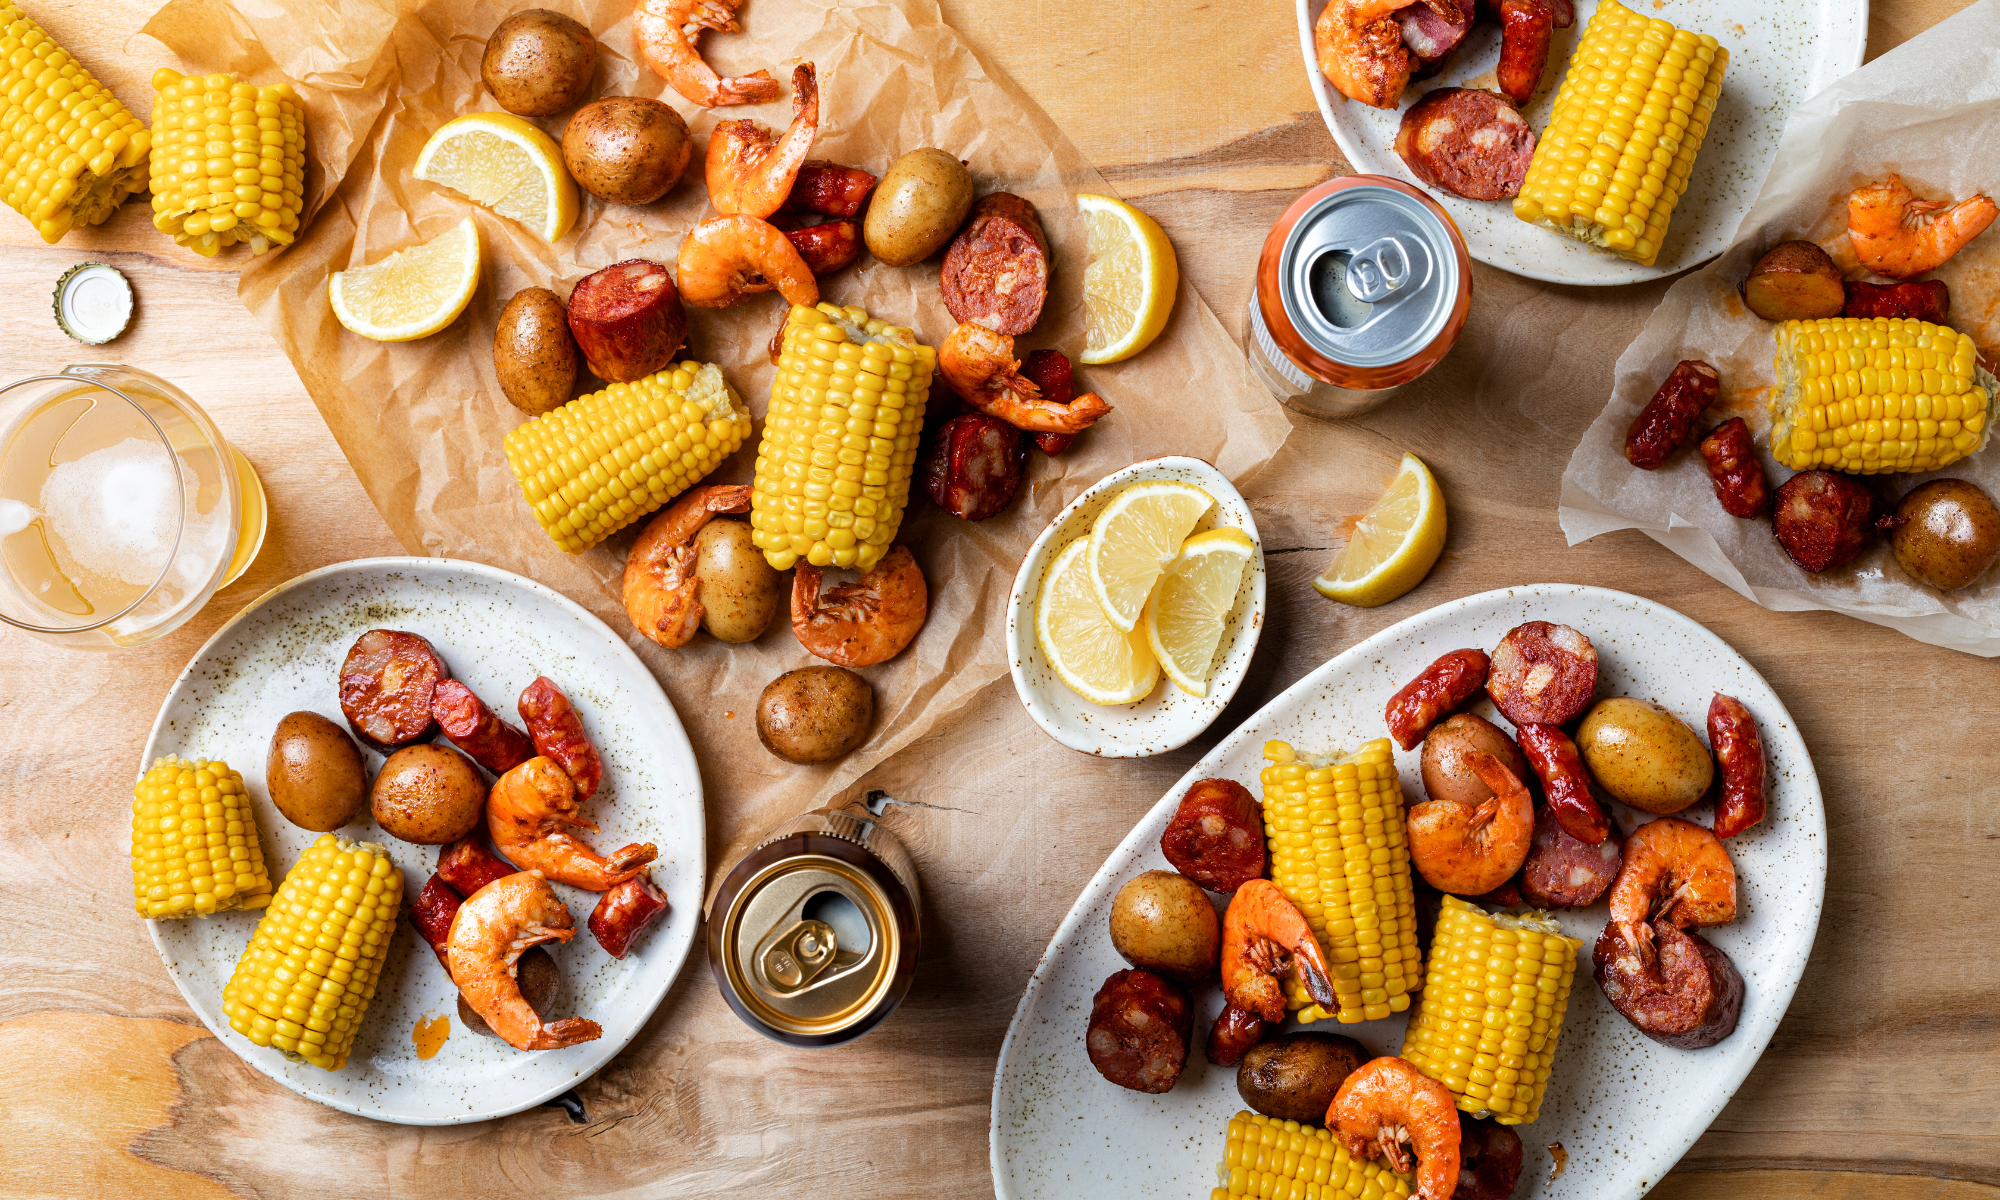 MANE & SHELL Oyster Roast & Low Country Boil